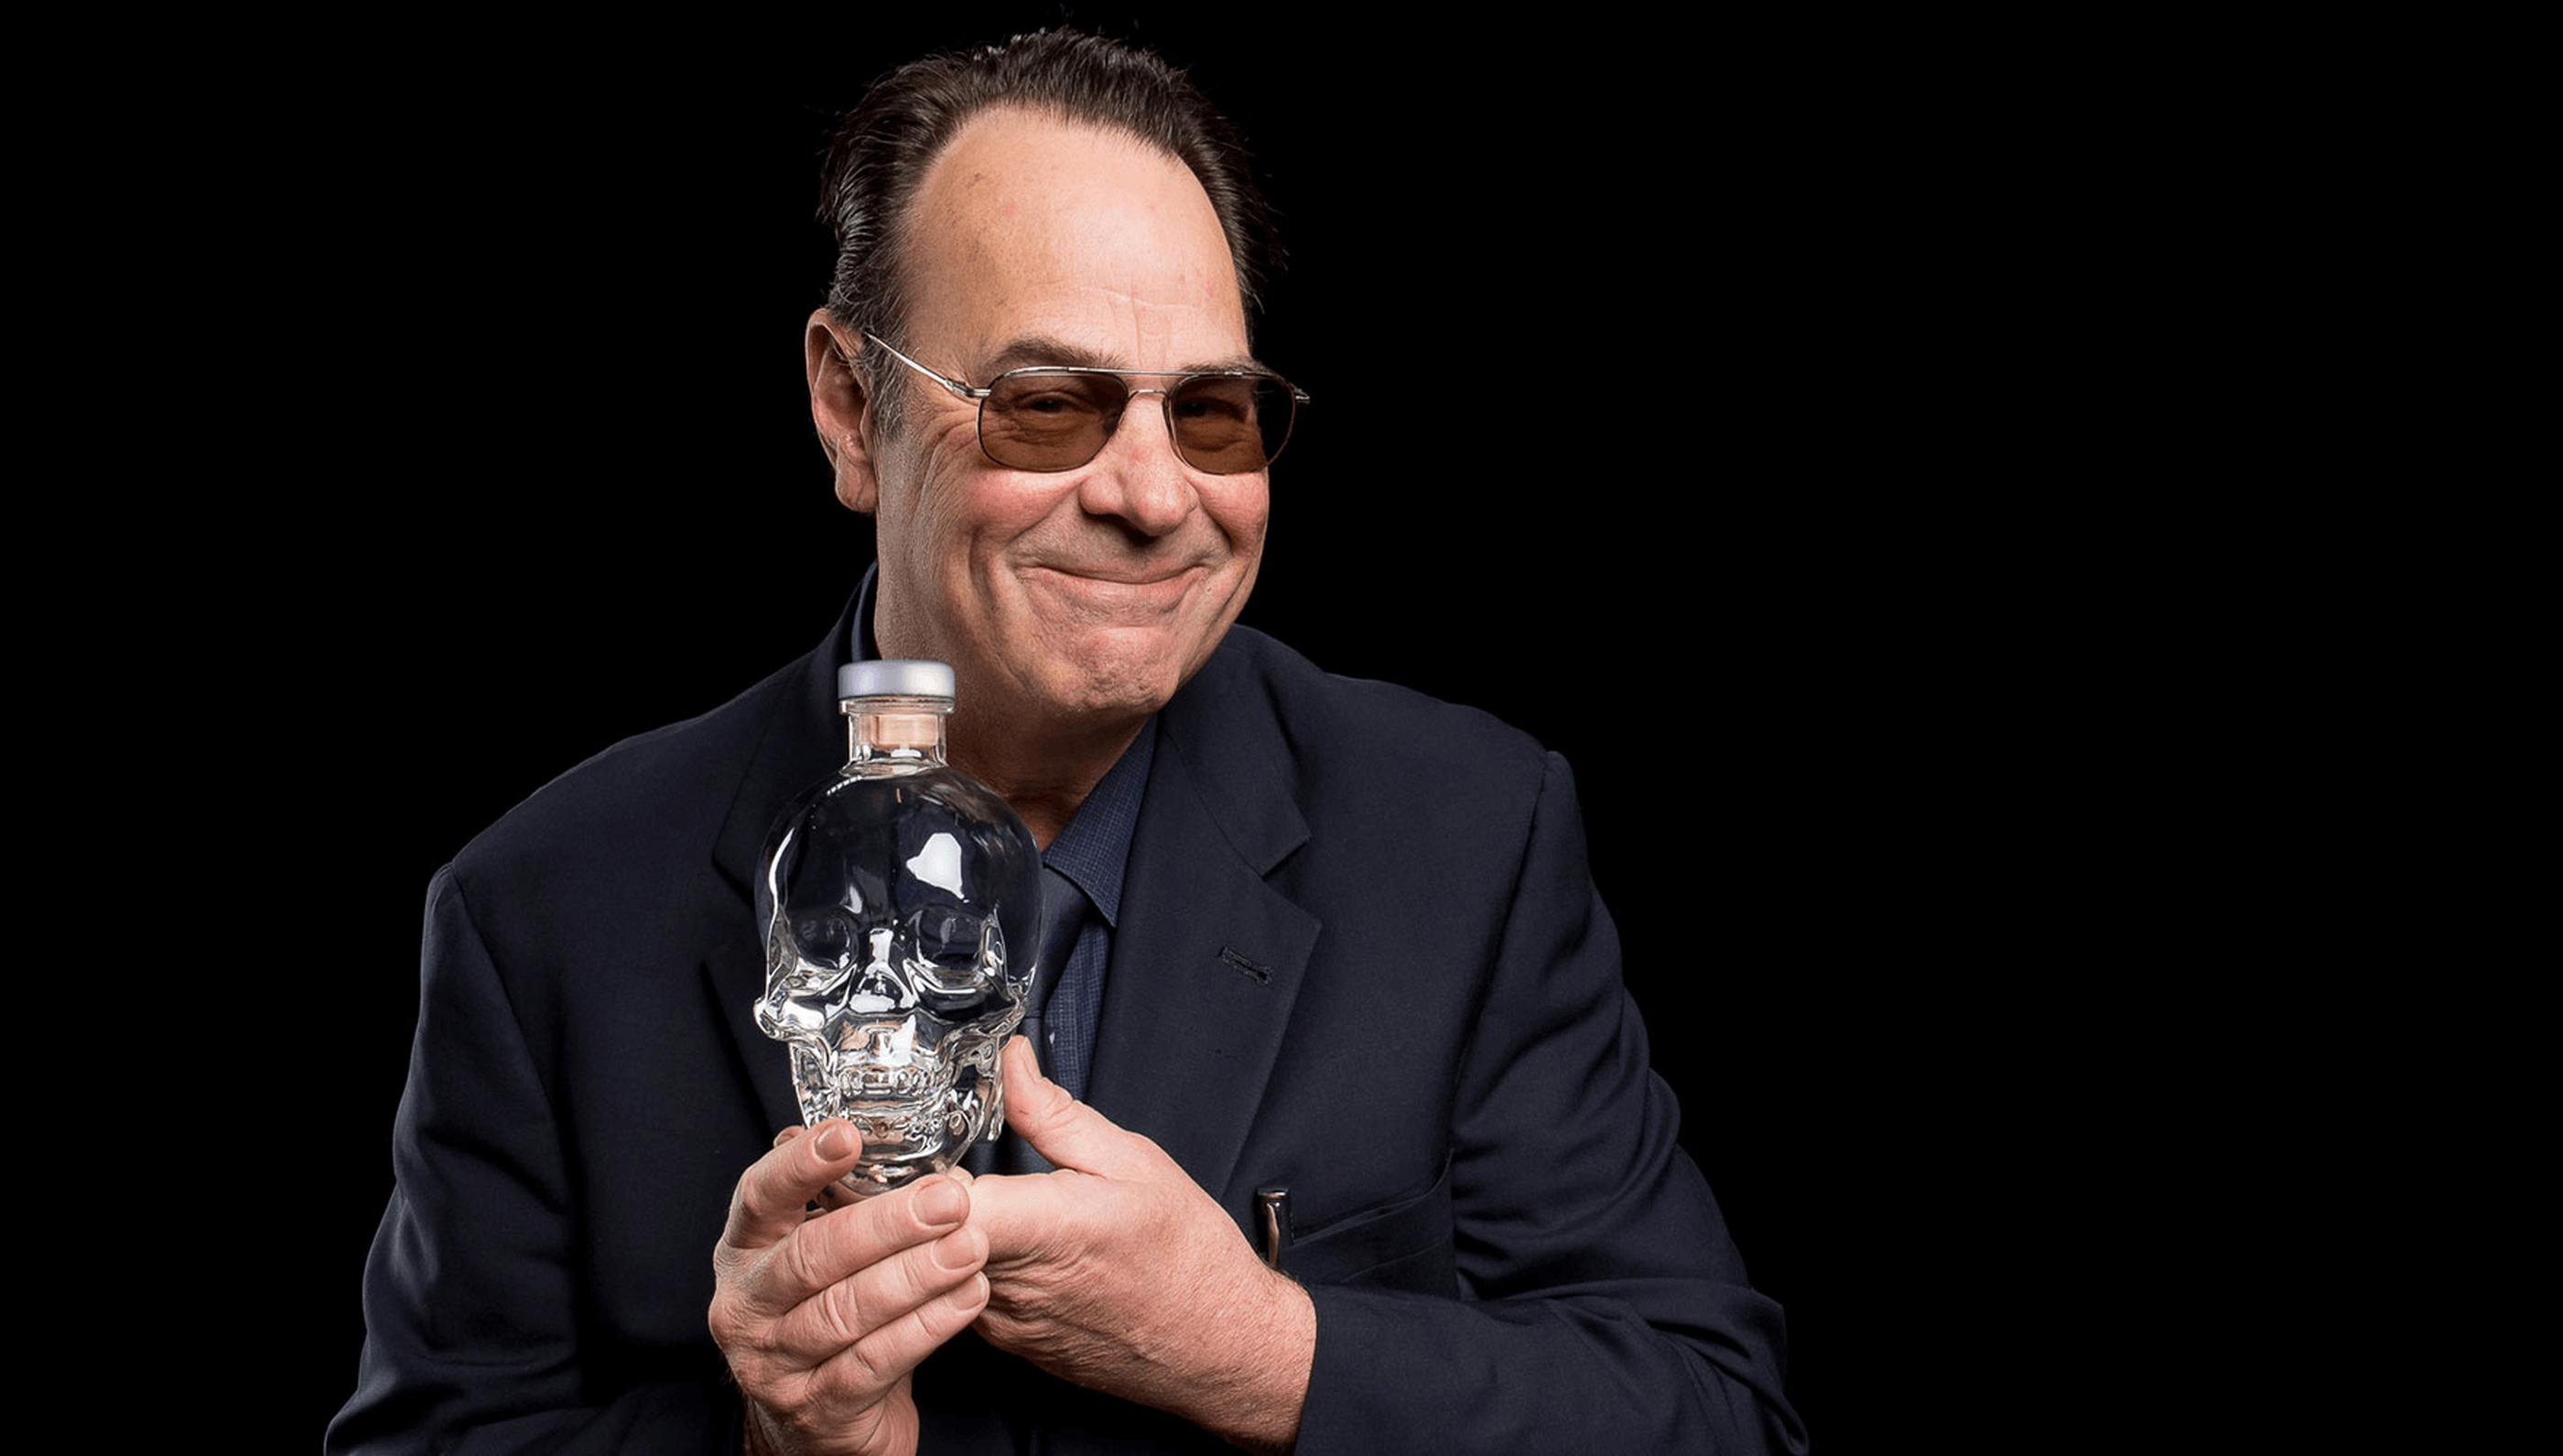 Dan poses with a bottle of Crystal Head Vodka